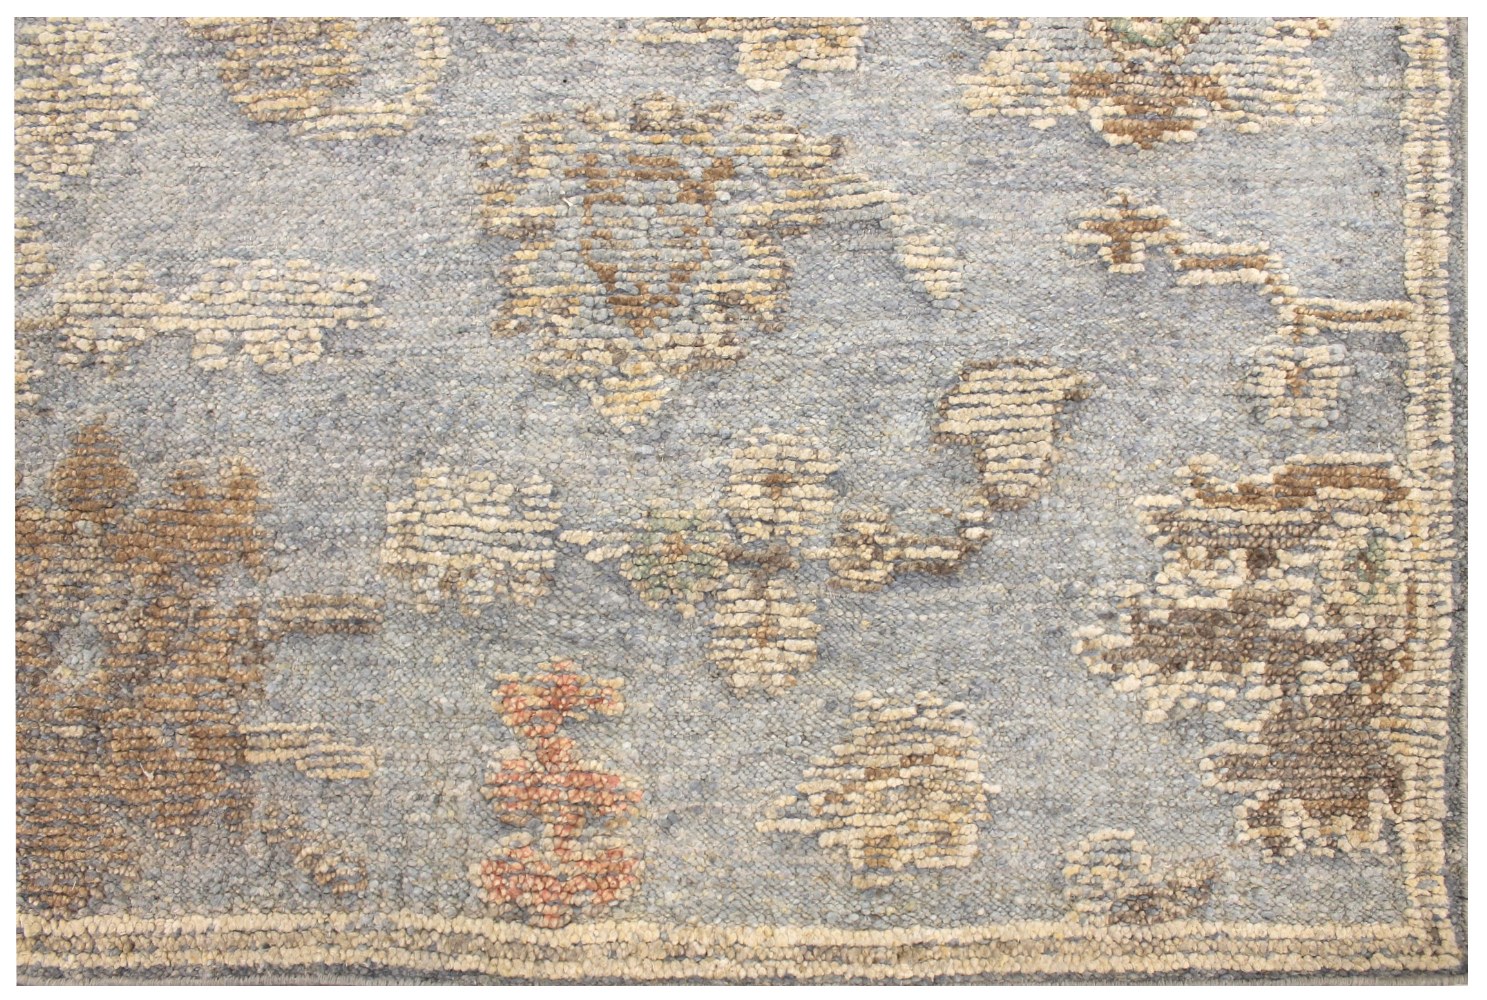 8x10 Oushak Hand Knotted Wool Area Rug - MR028660